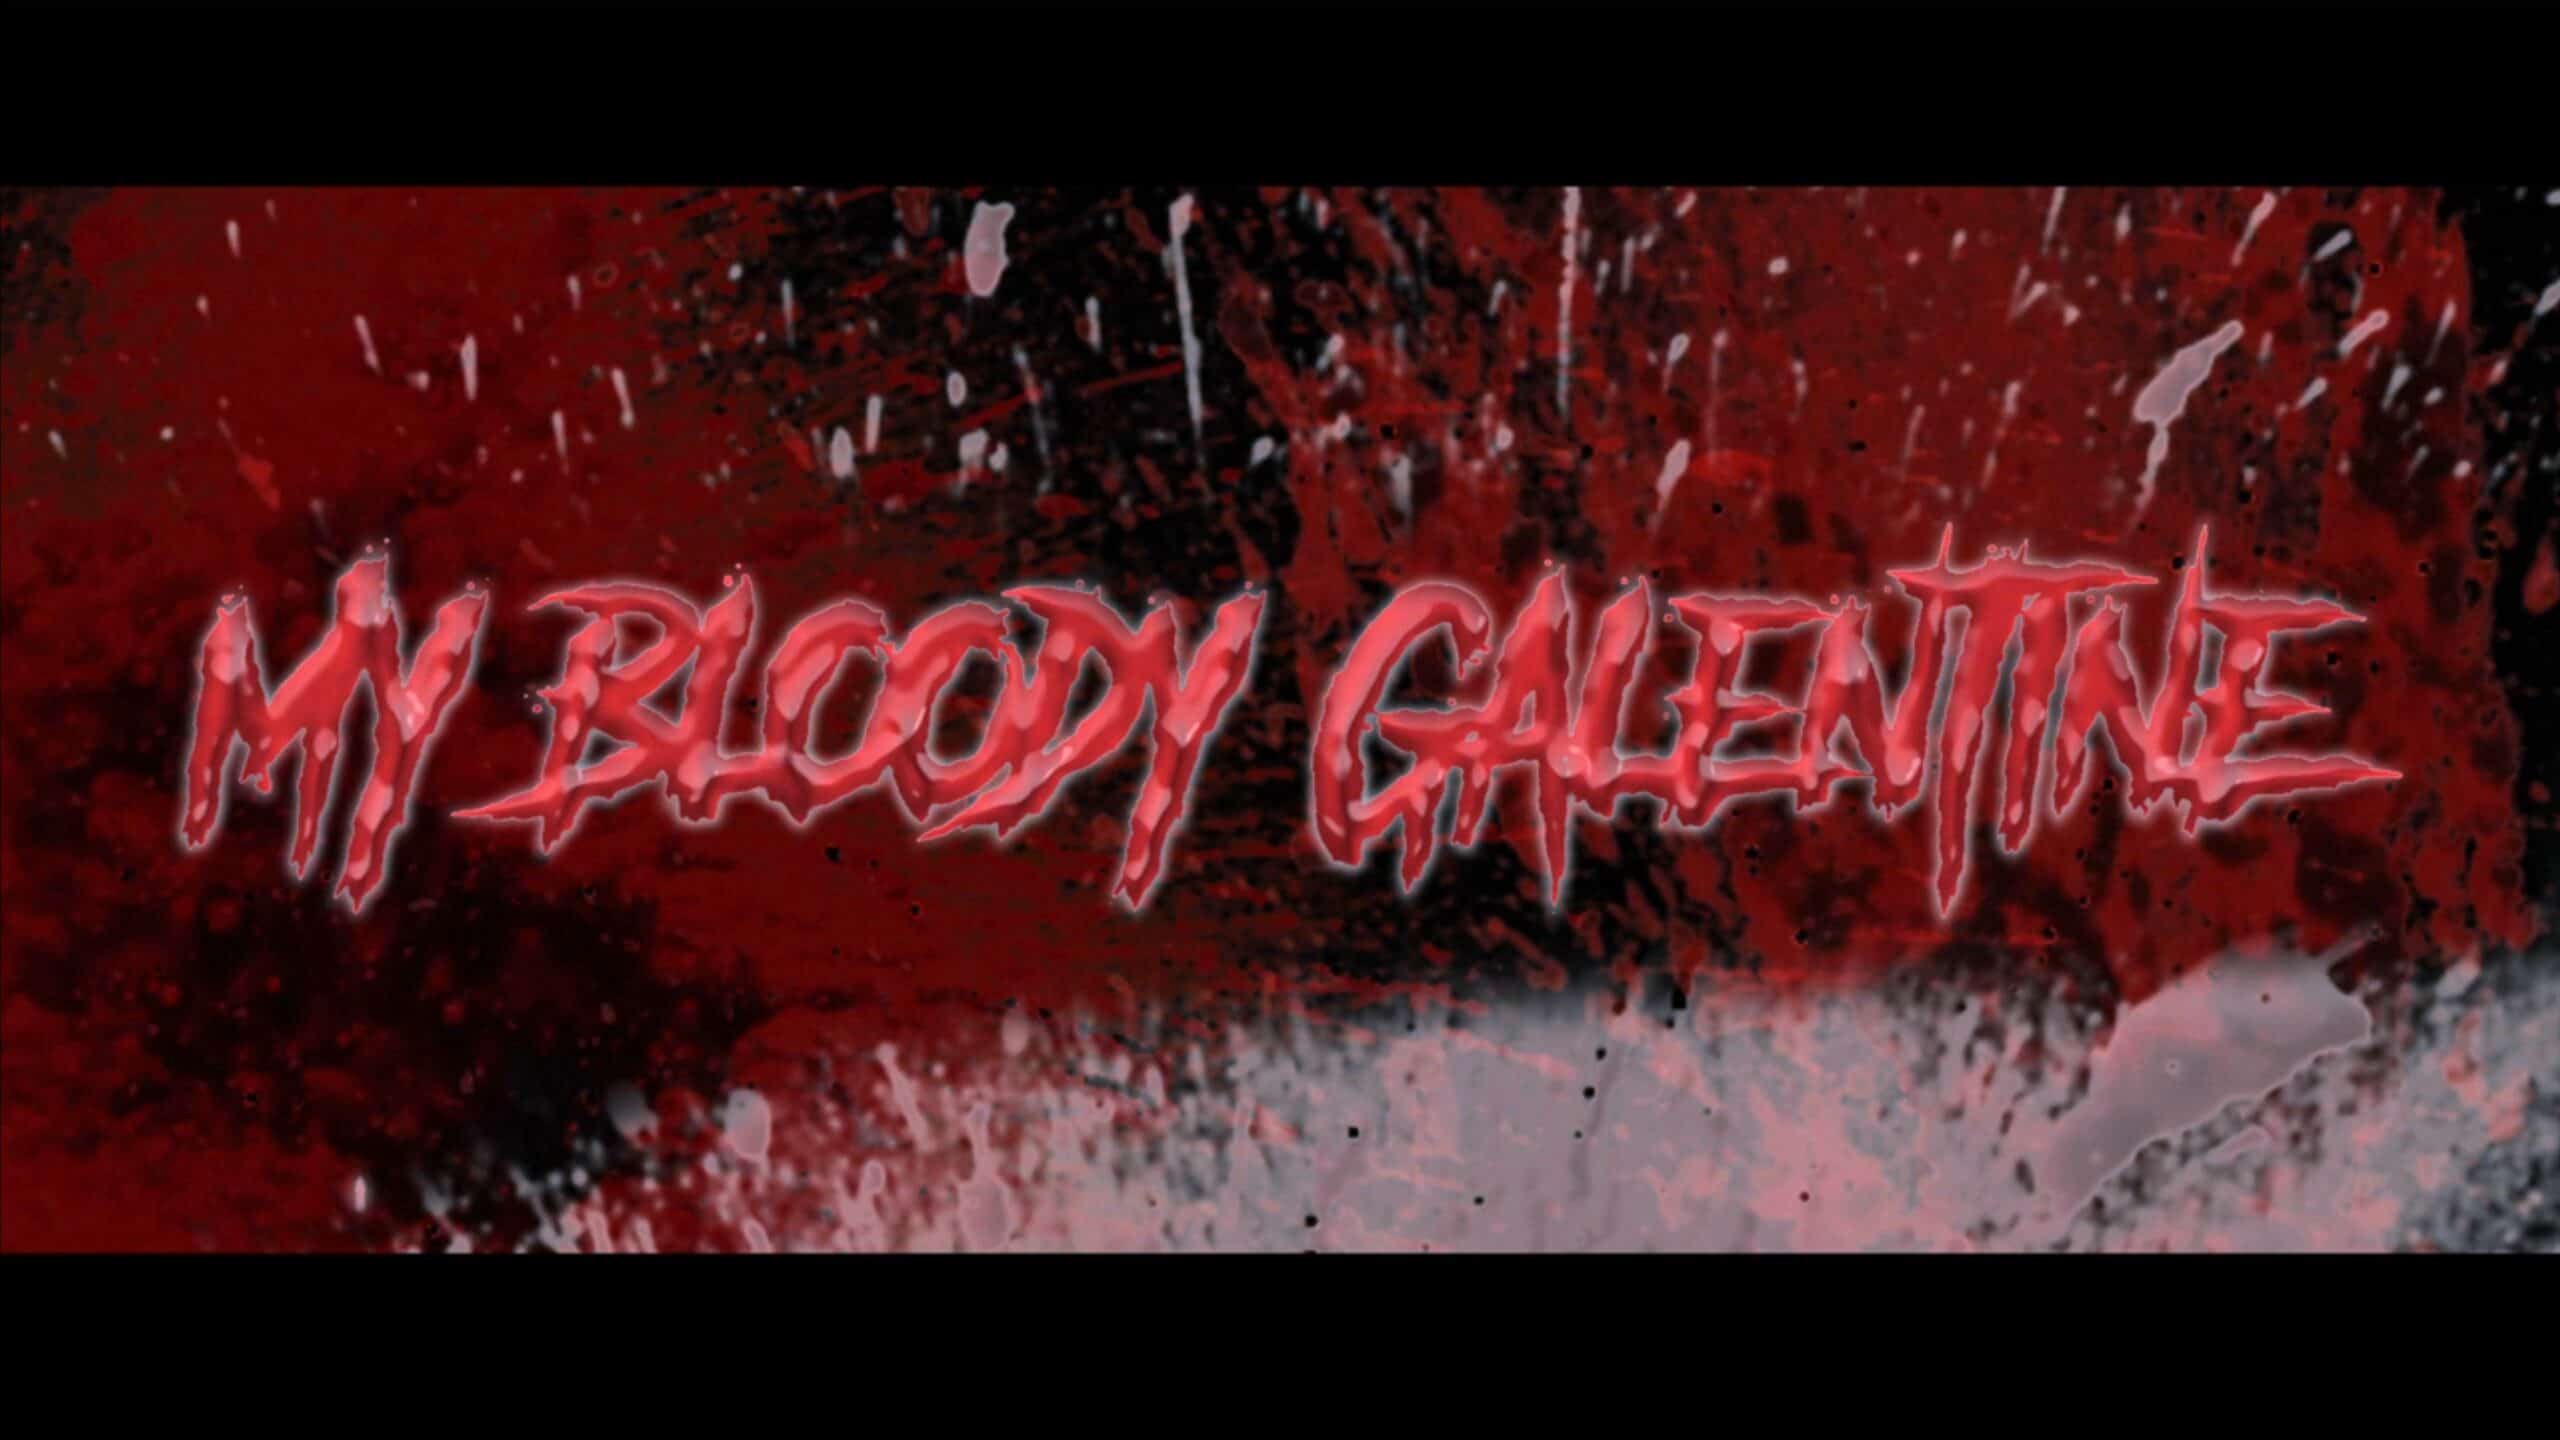 Title Card - My Bloody Galentine